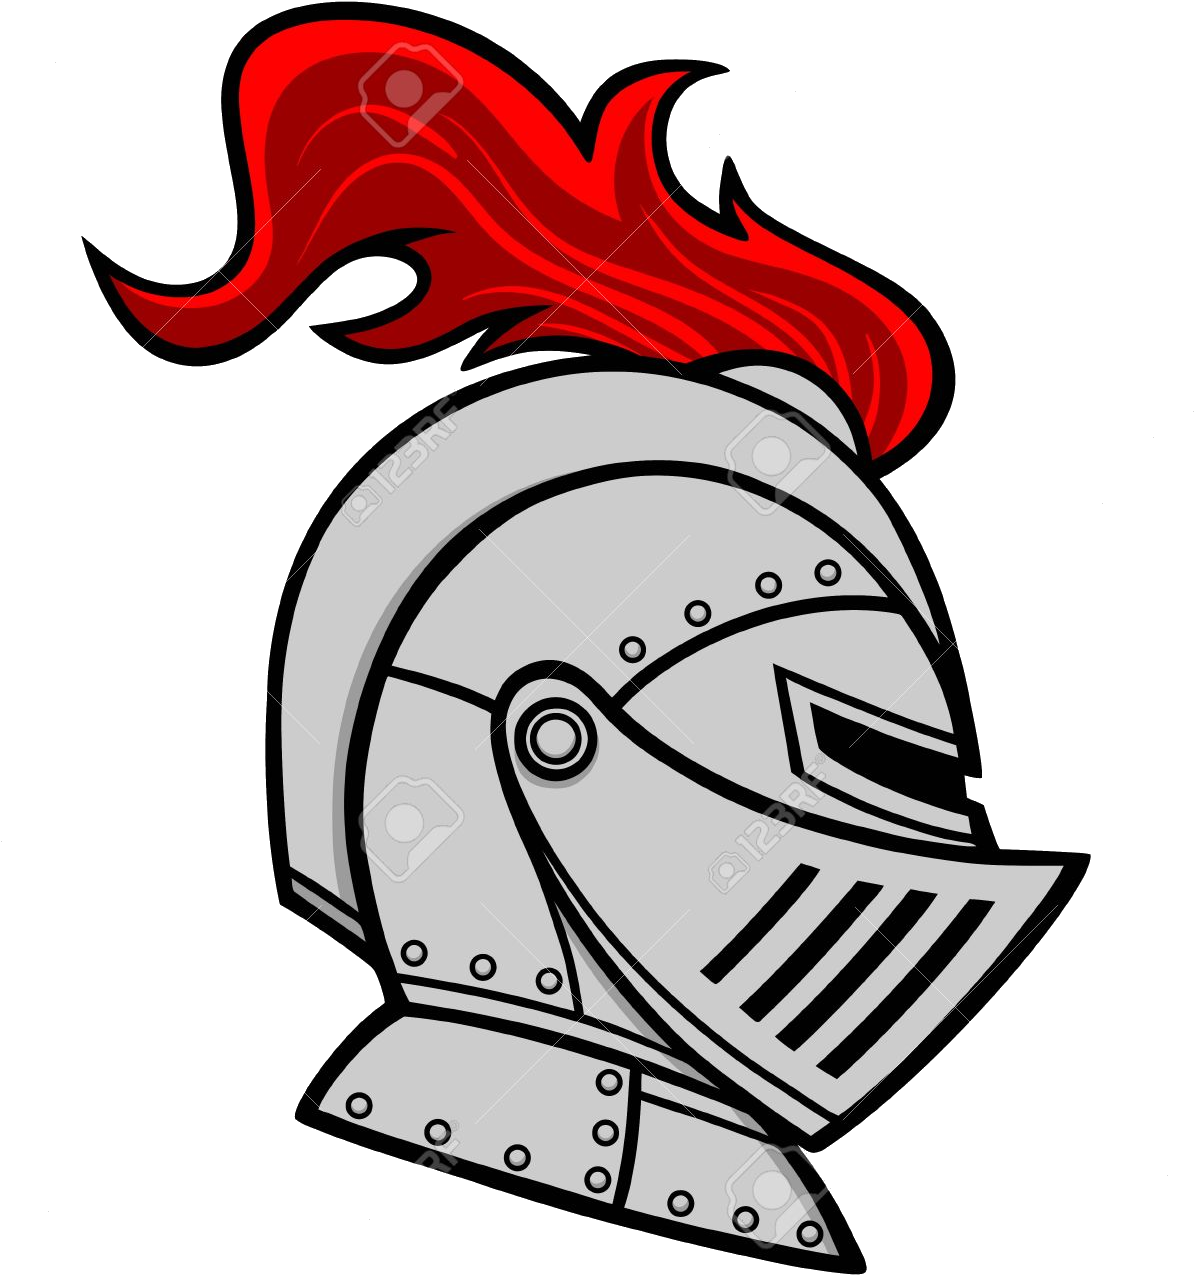 A Cartoon Of A Knight's Helmet With Red Flames